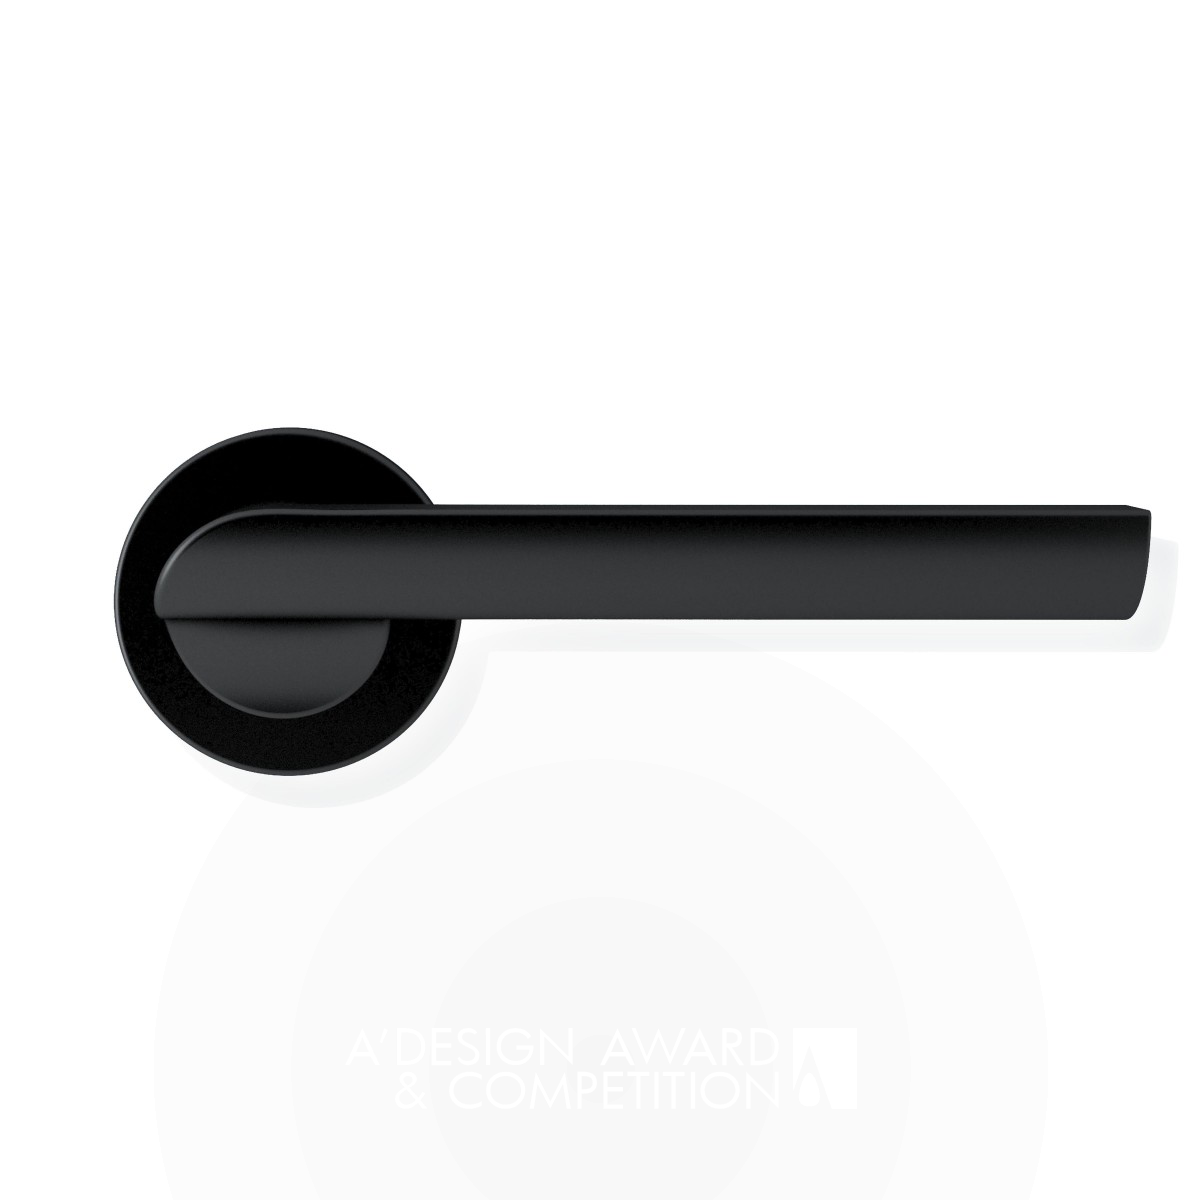 Punto Door Handle by Robby Cantarutti Silver Furniture Accessories, Hardware and Materials Design Award Winner 2020 